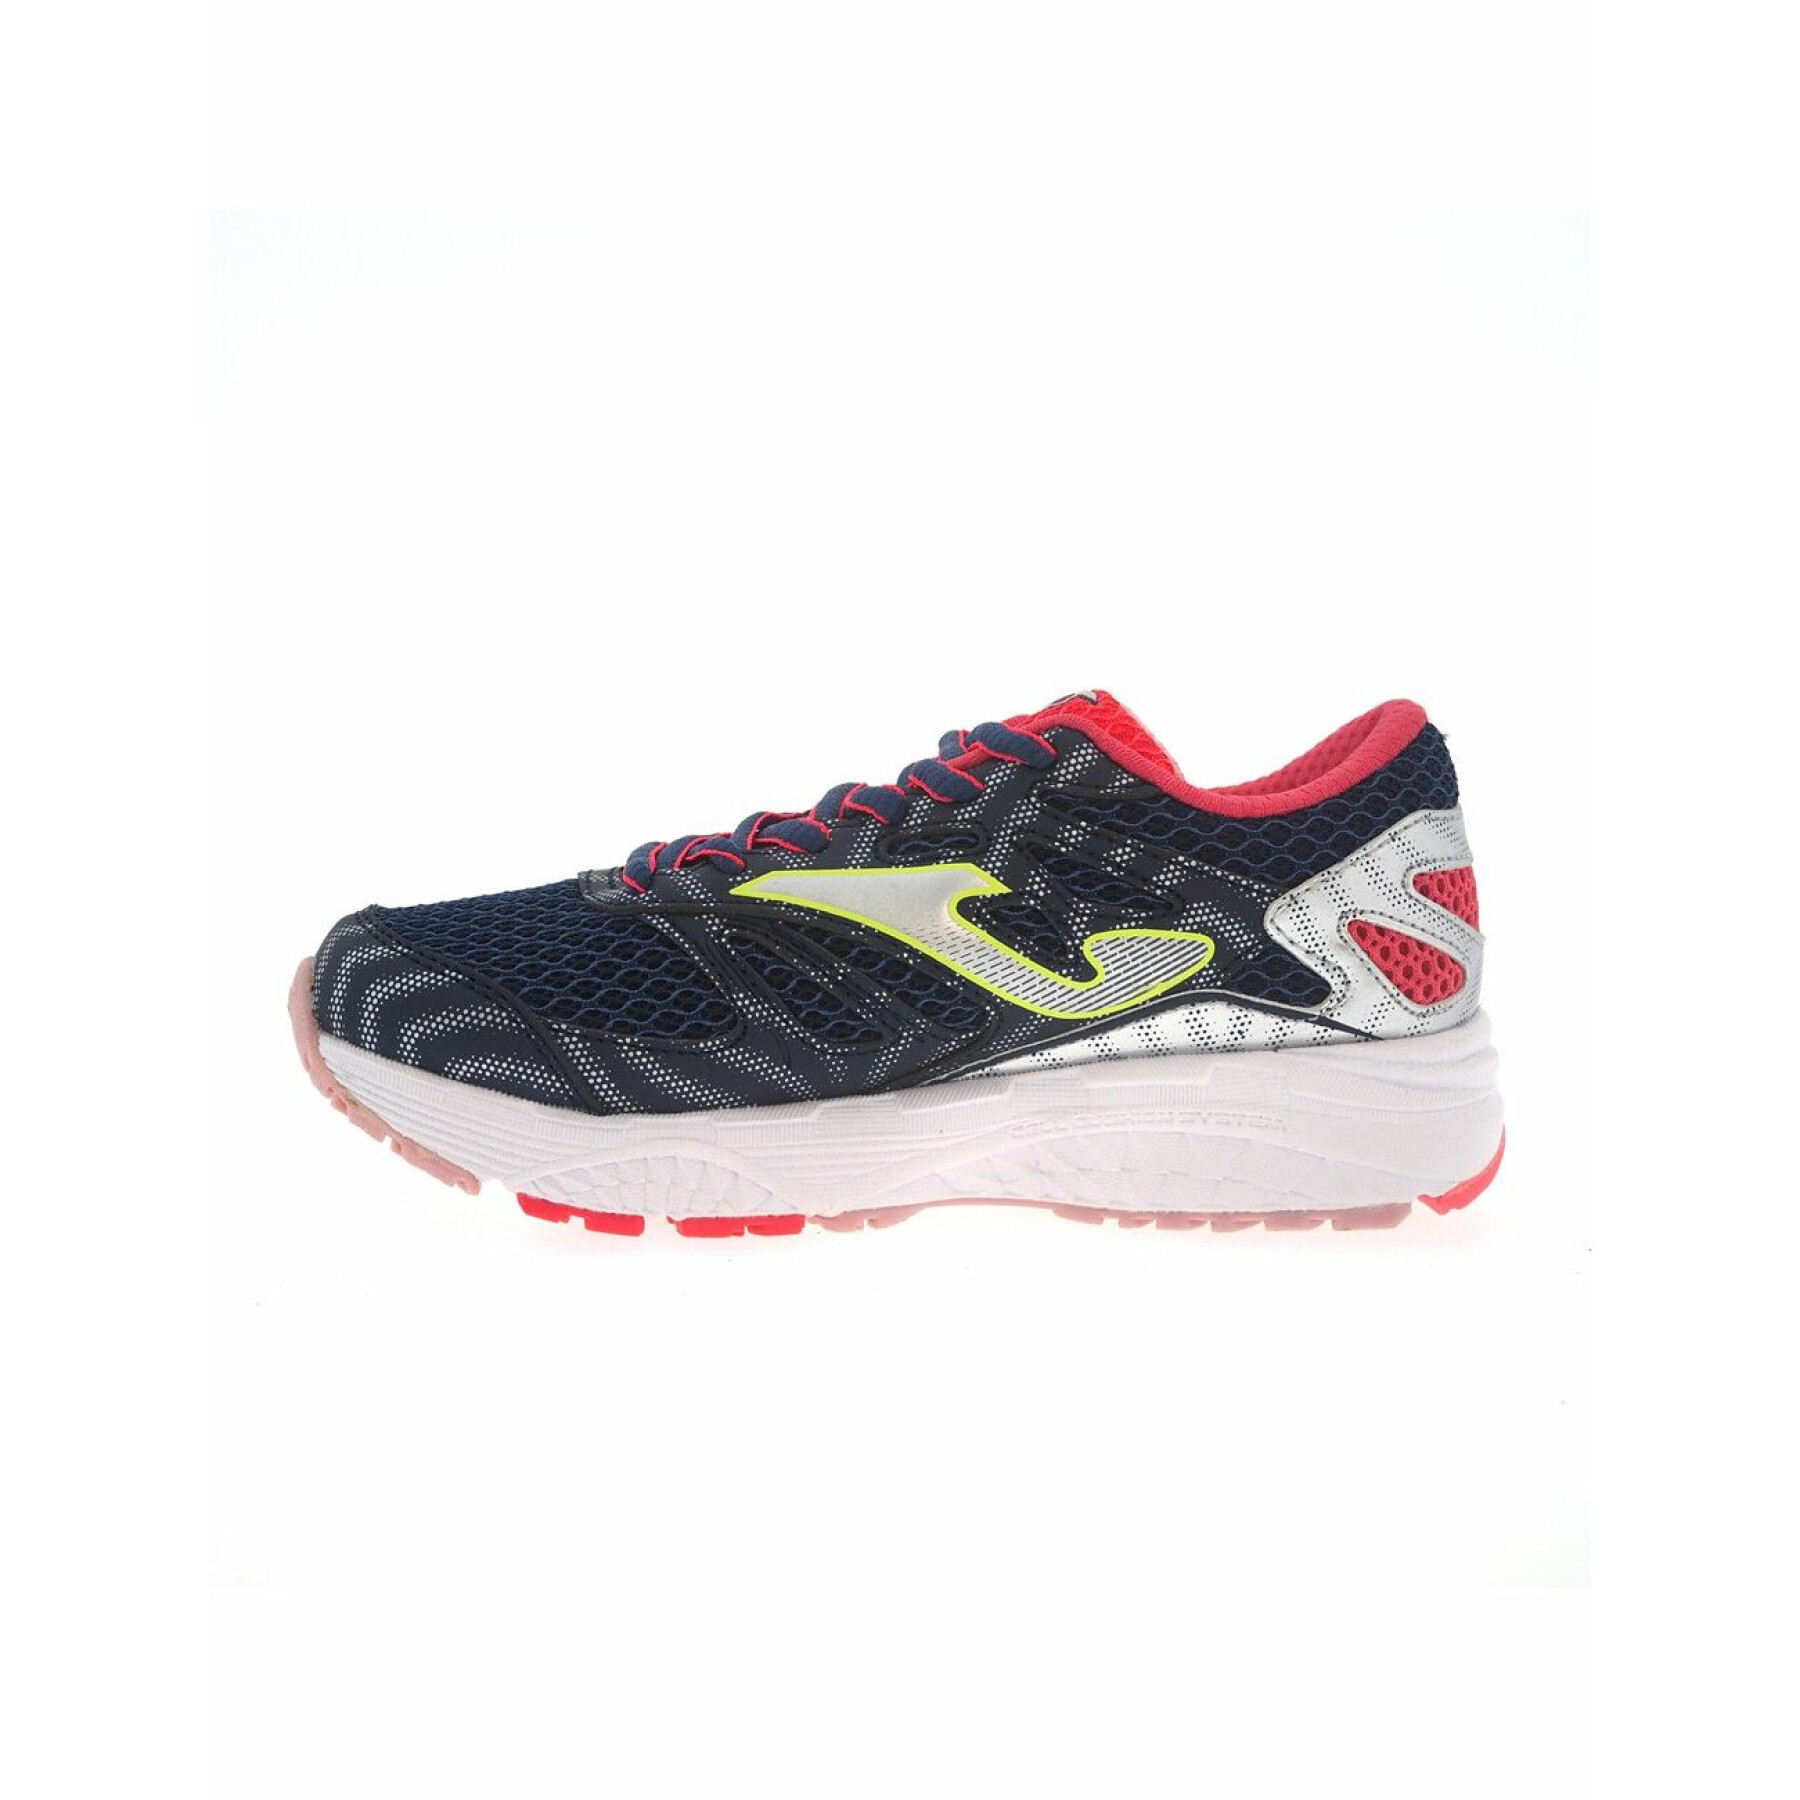 Children's shoes Joma Victory J 2033